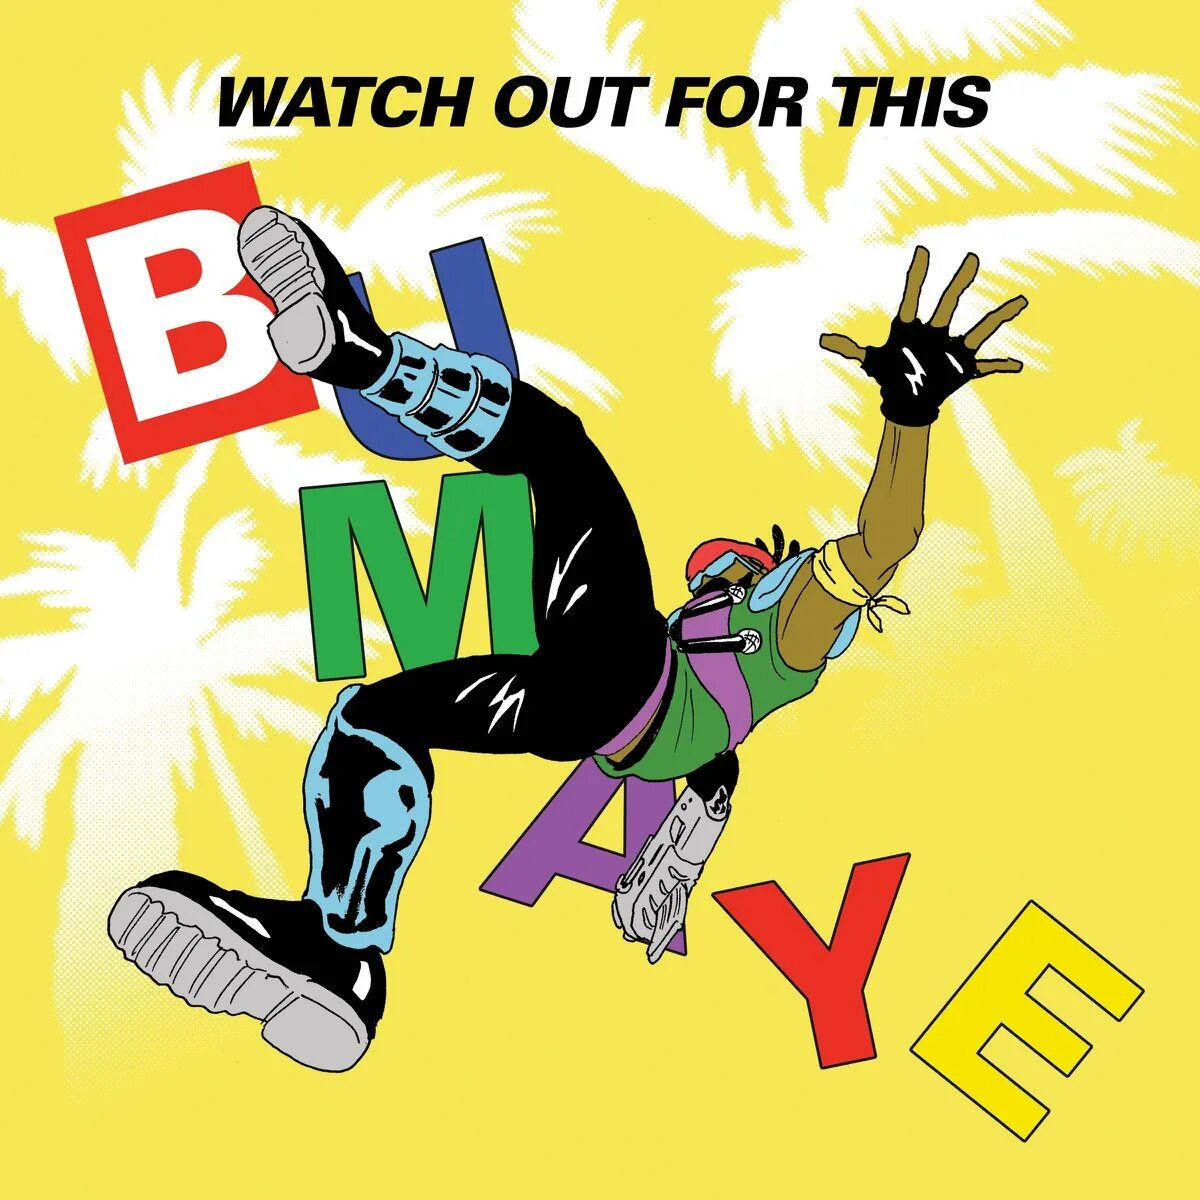 Major Lazer watch out for this. Watch out for this (Bumaye). Major Lazer watch out for this фото. Watch out for this (Bumaye) [feat. Busy Signal, the Flexican & FS Green] от Major Lazer. Watch out for this